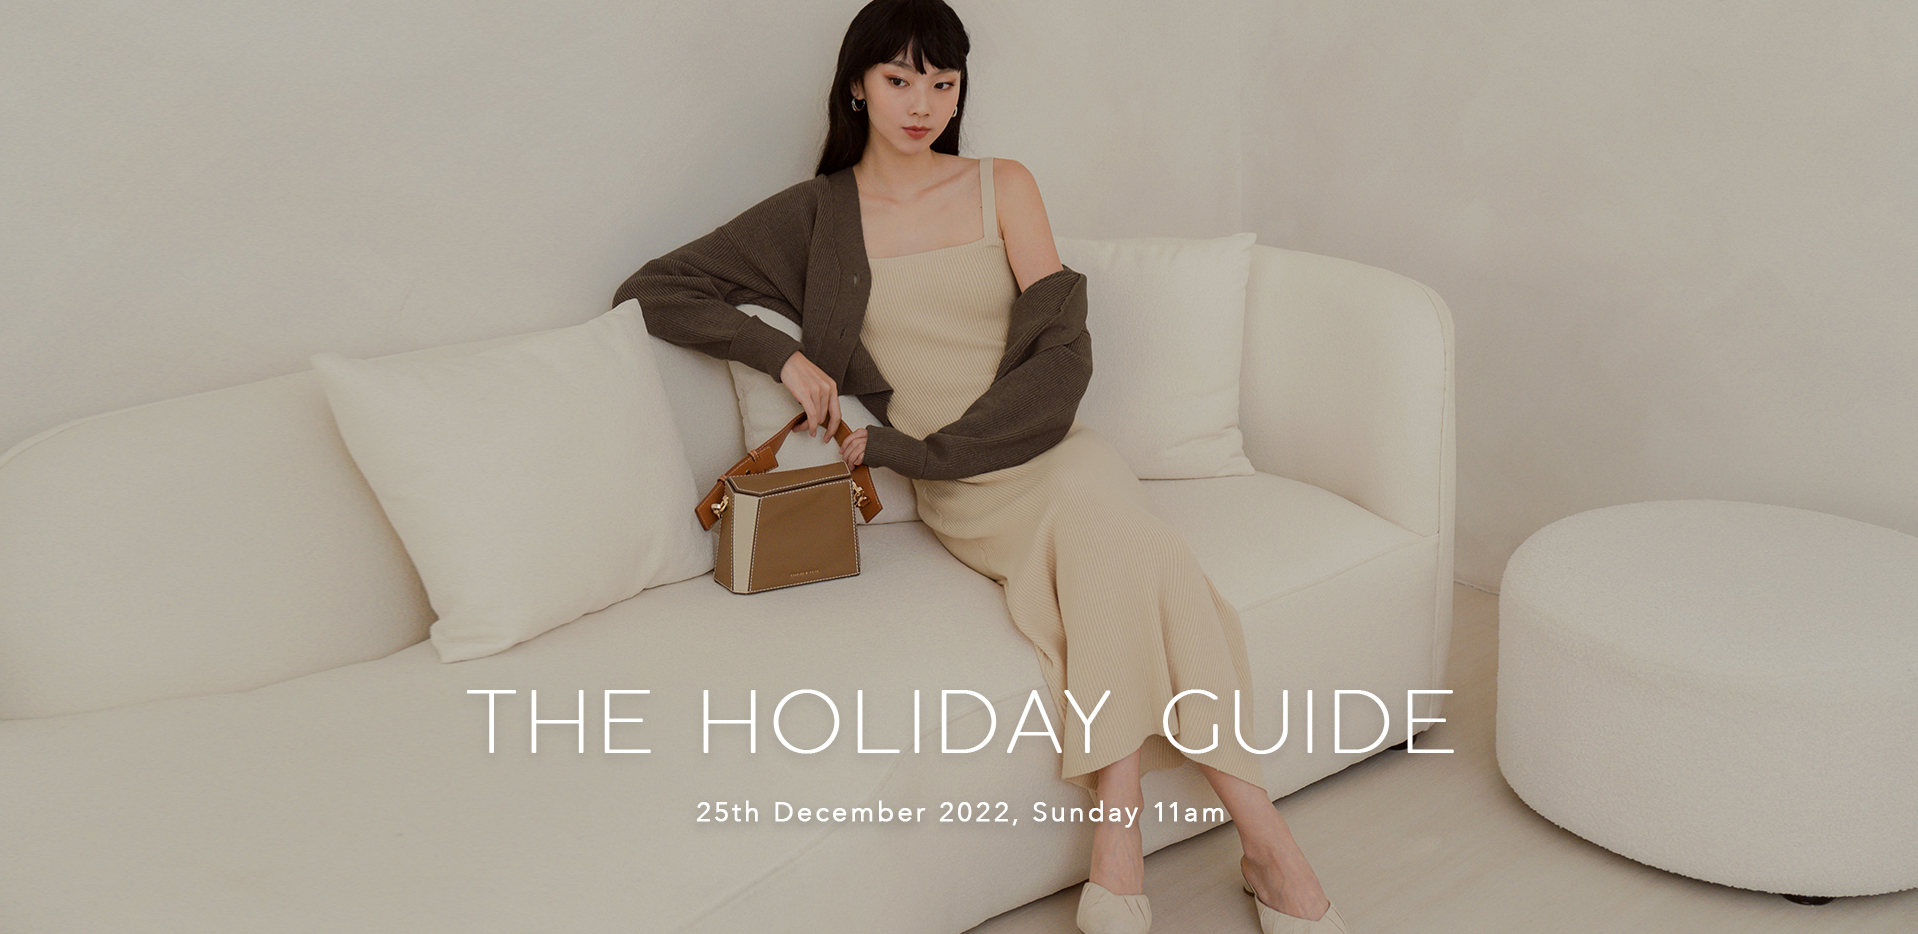 THE HOLIDAY GUIDE